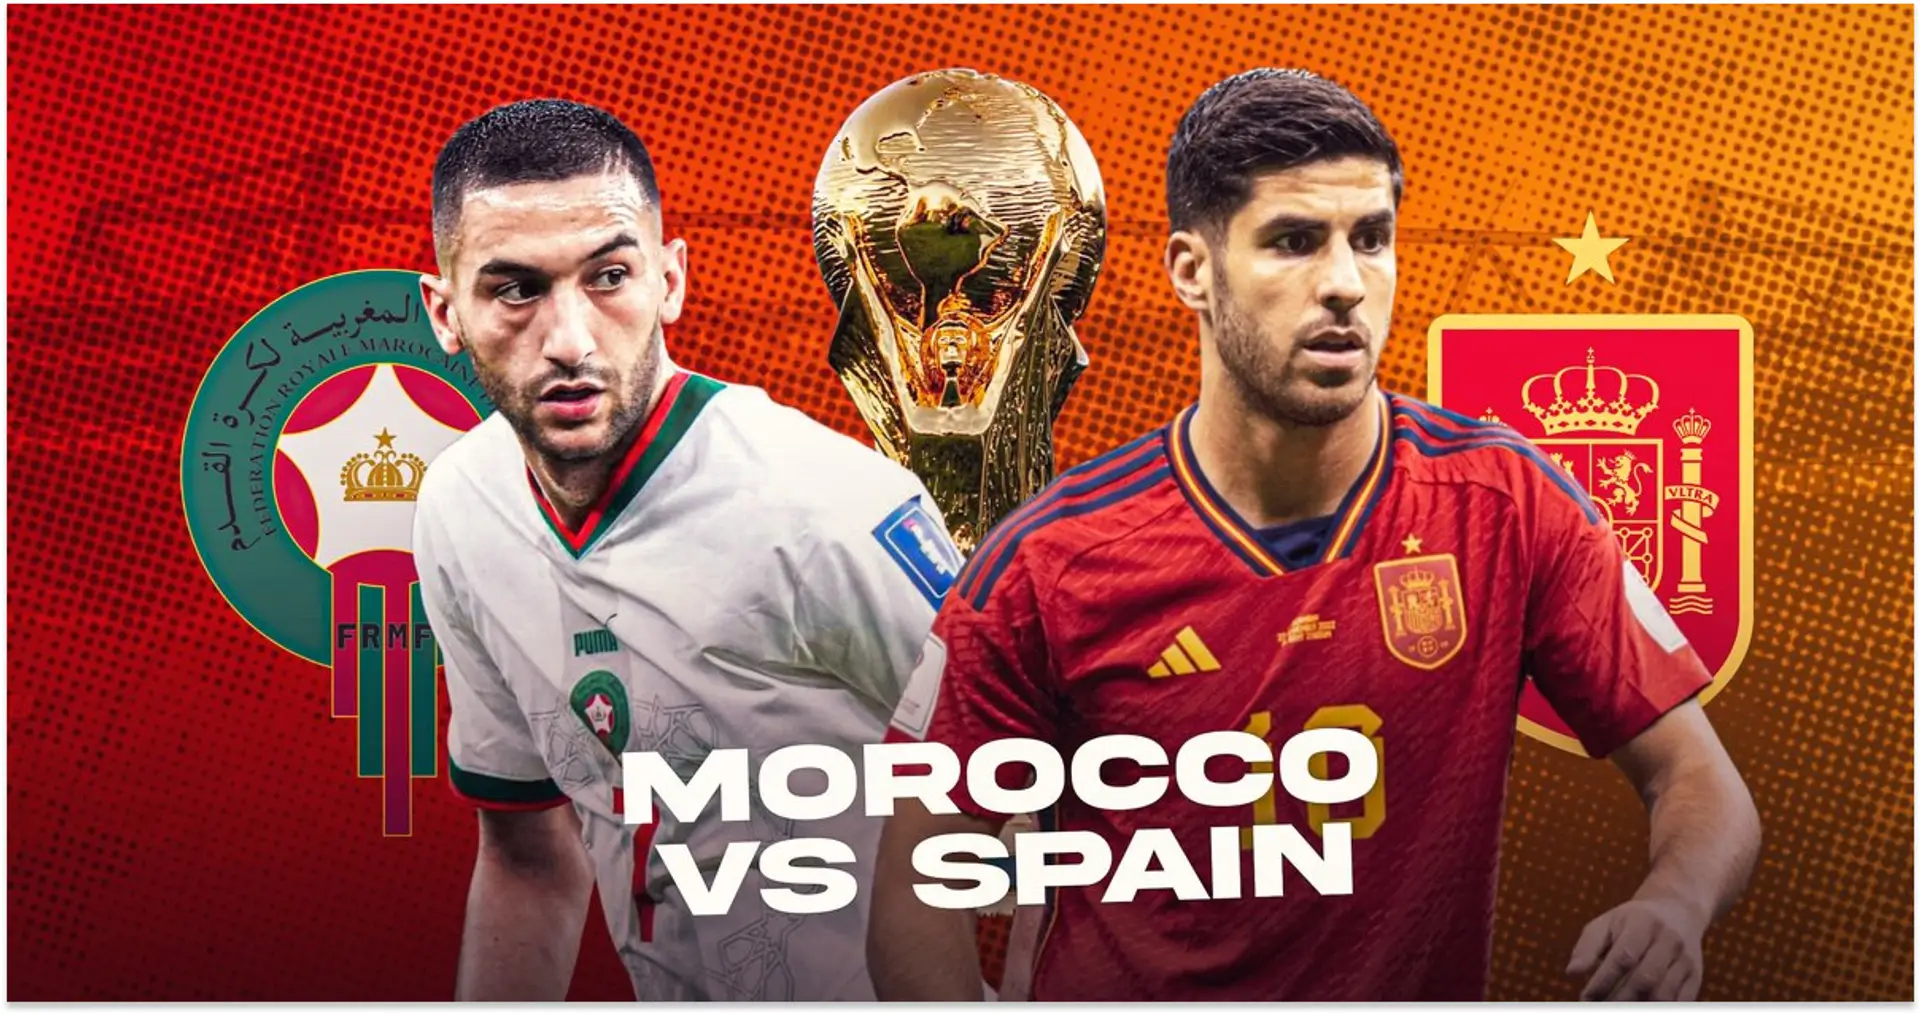 Morocco vs Spain: Official team lineups for the World Cup clash revealed